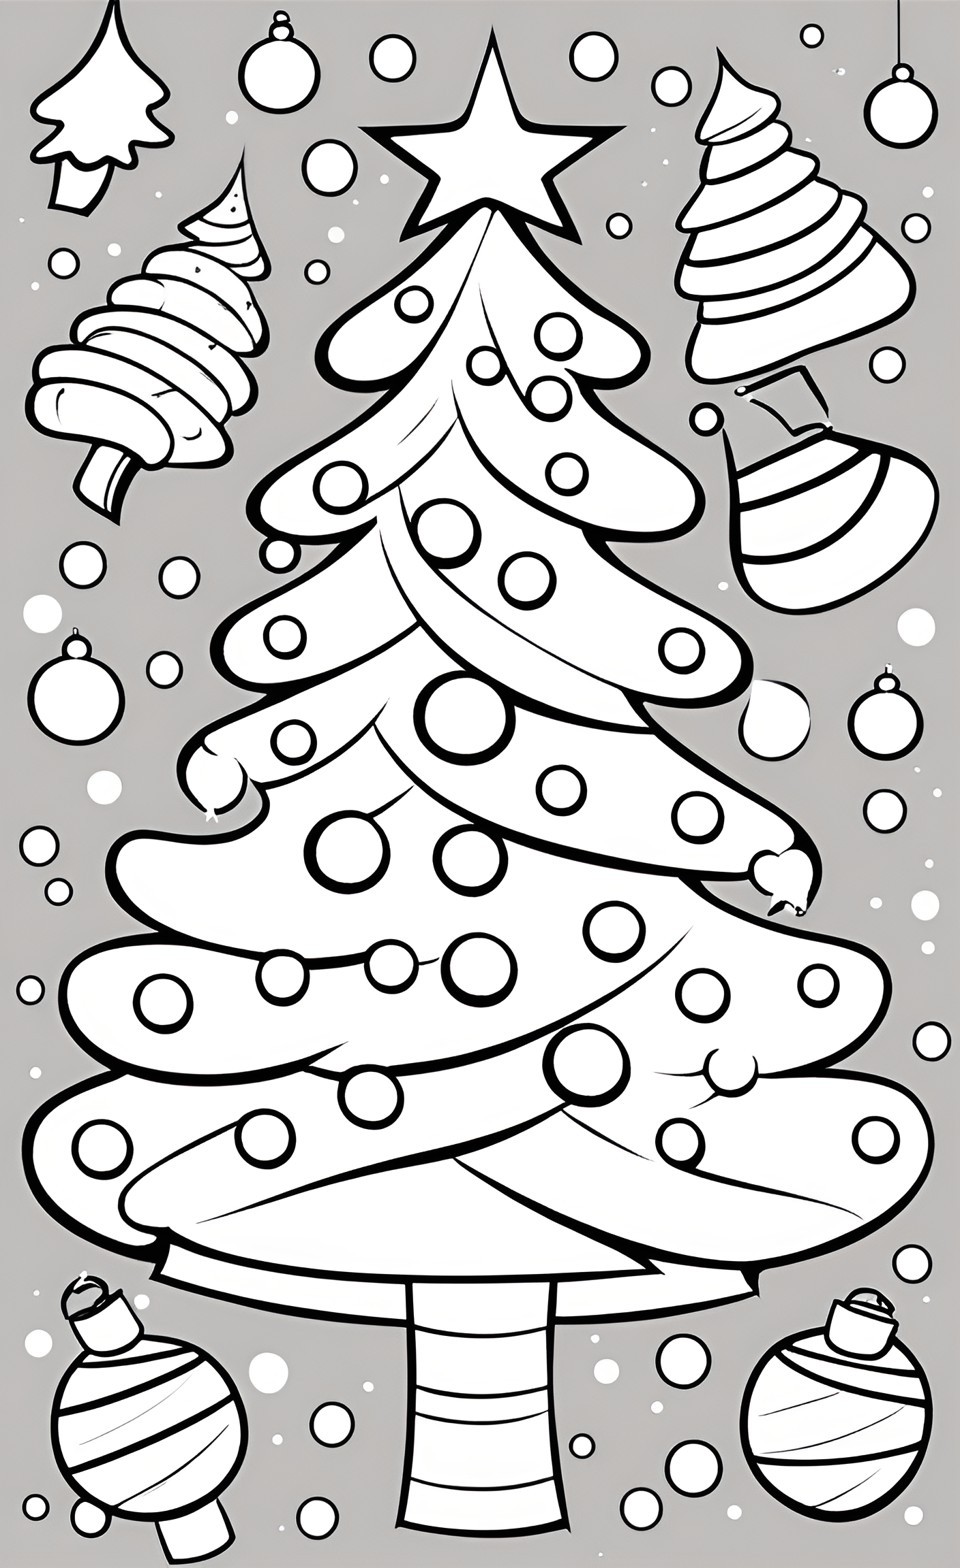 Simple Christmas Tree coloring pages for kids